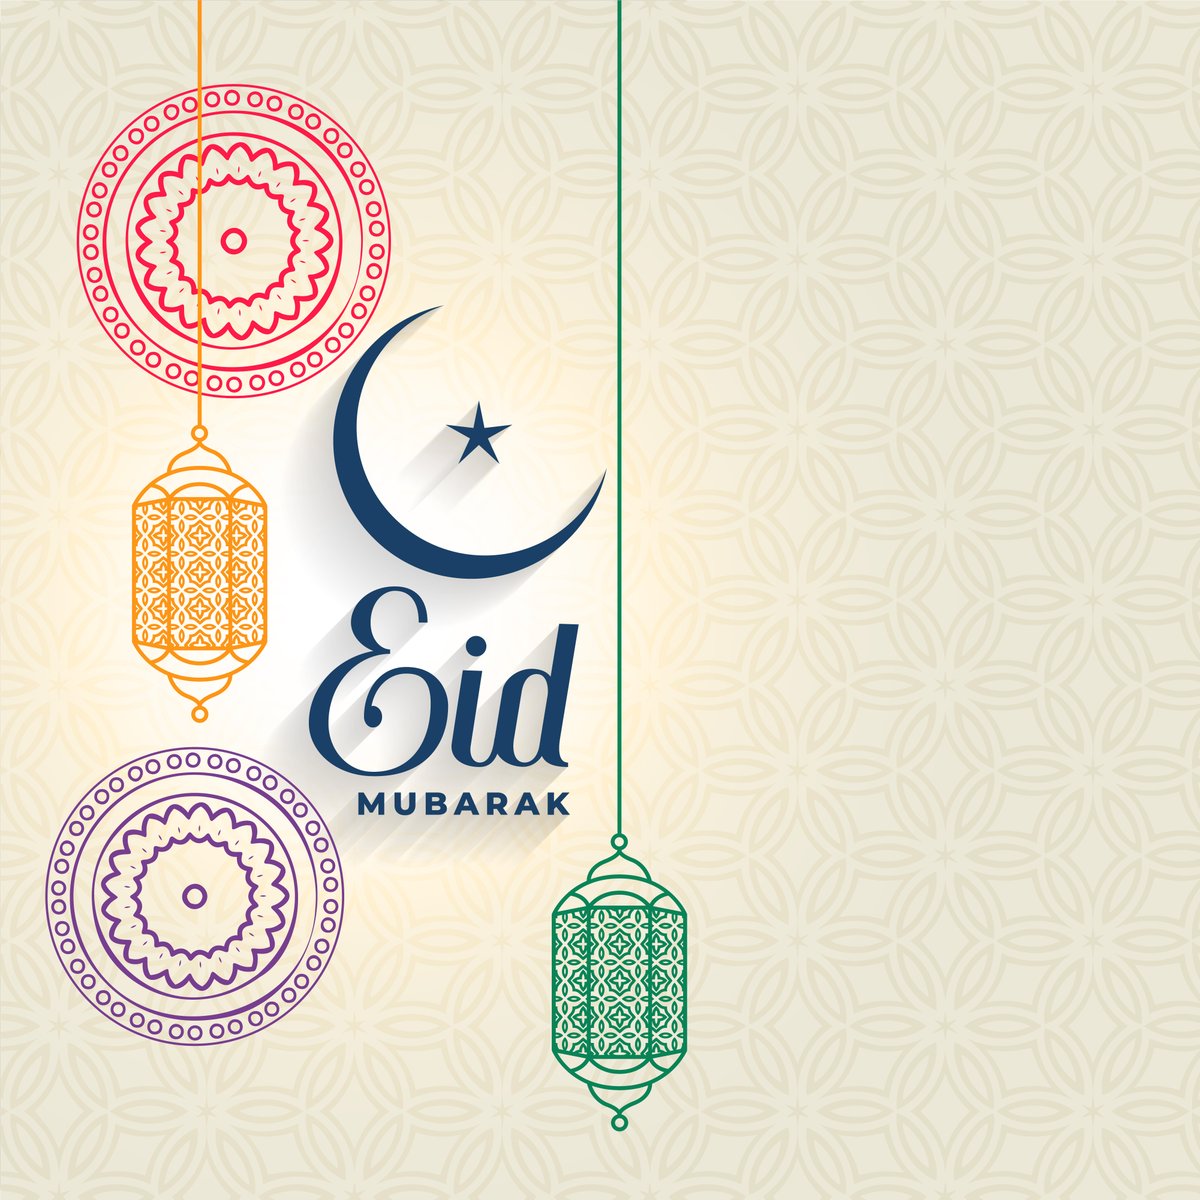 As the holy month of Ramadan comes to a close, we wish all our Muslim members and others in the university community a blessed and joyful Eid al-Fitr!